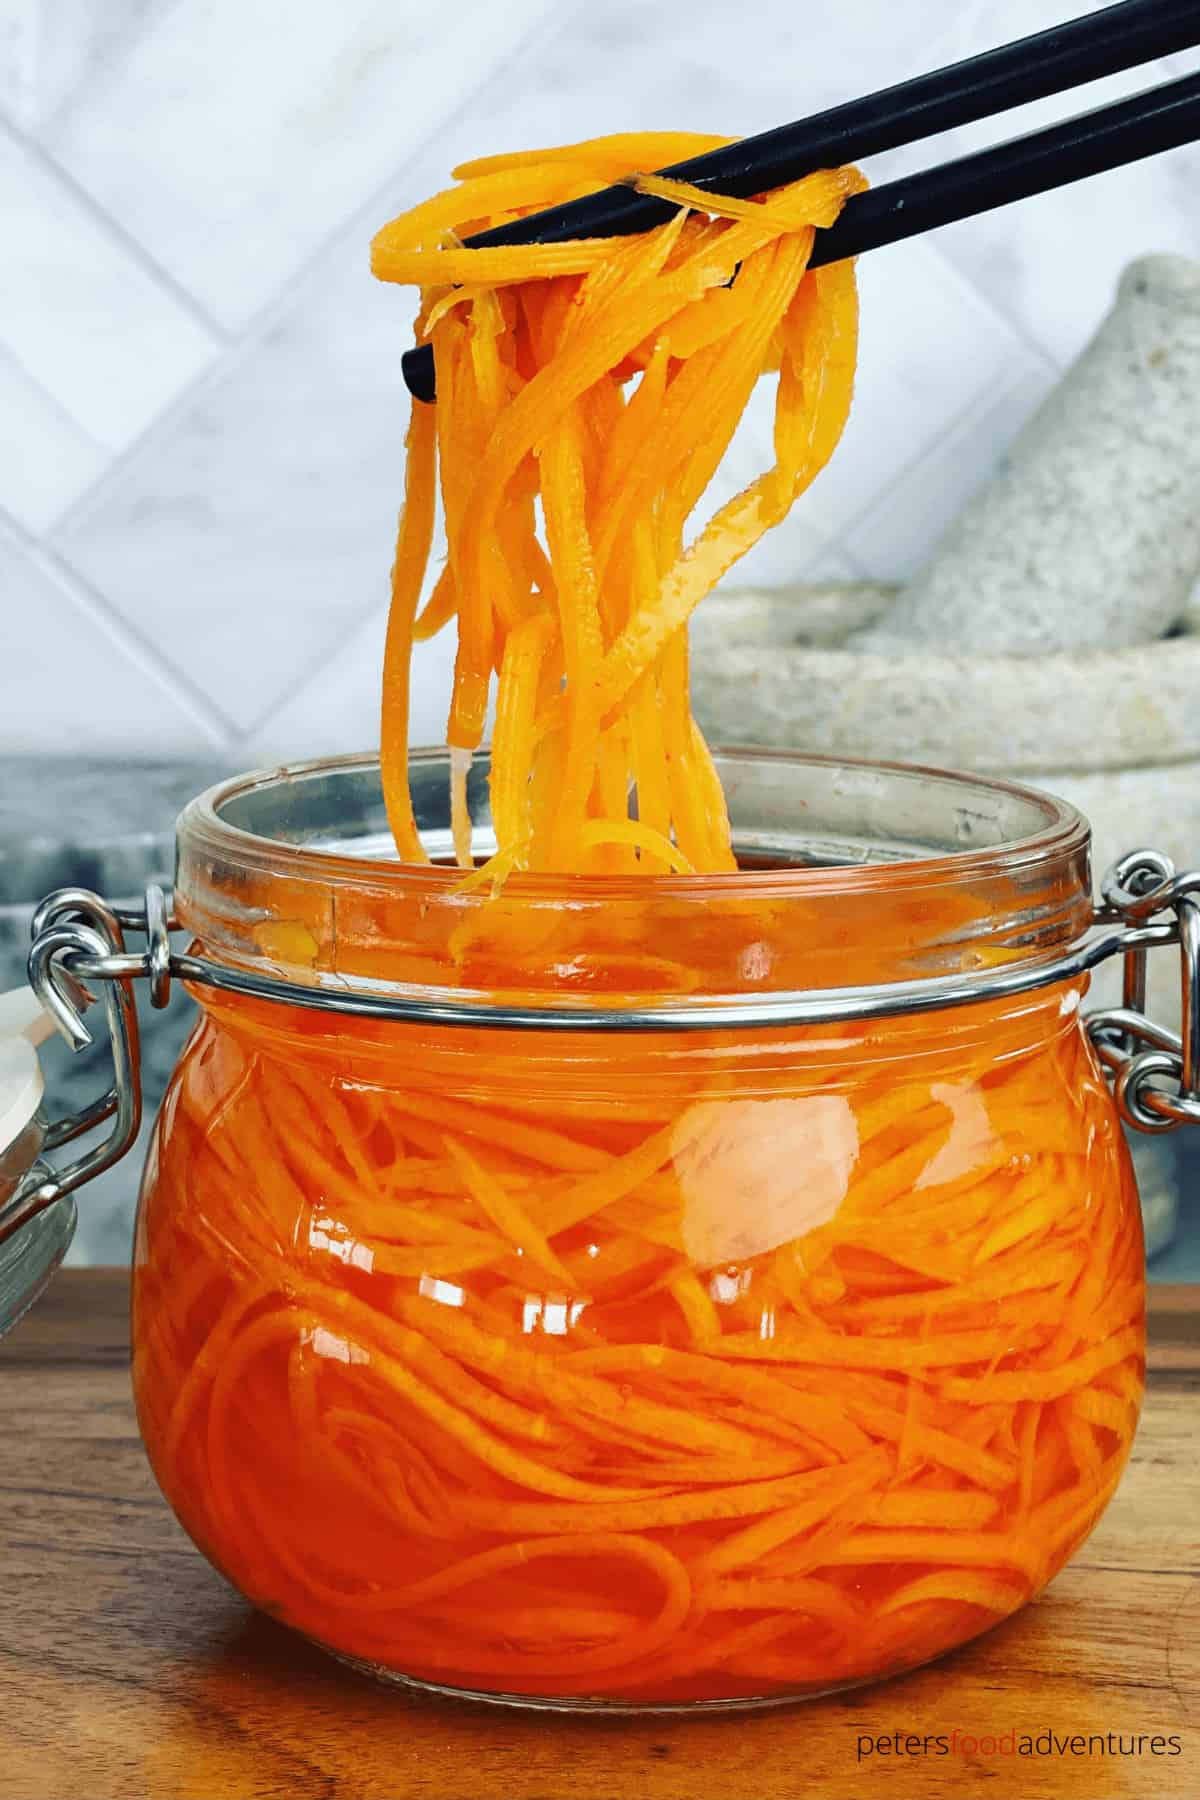 Quick Pickled Carrots recipe that's perfect for your Vietnamese Rolls or as a pickled side dish. Sweet and tangy with that vinegary pickle flavor that everyone loves. Takes only minutes to prepare!